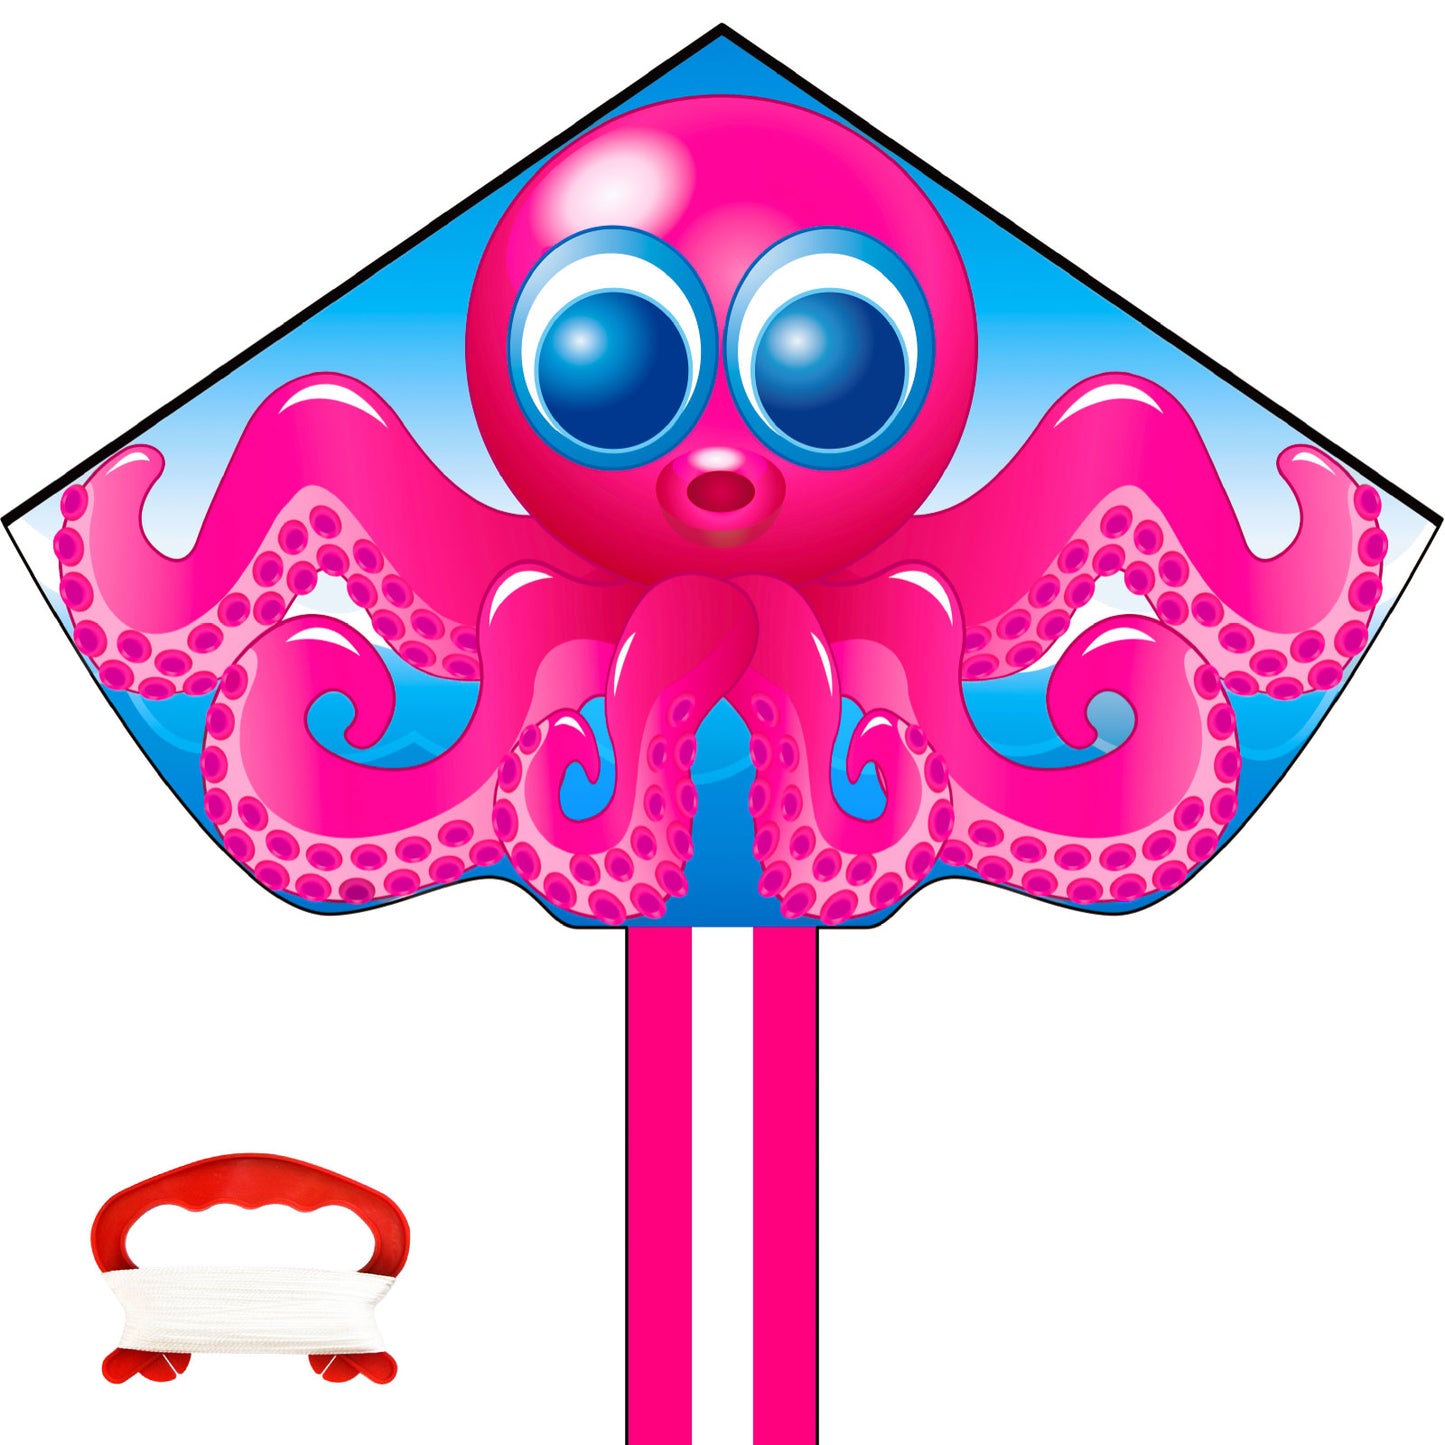 Kite for Kids Age 4-8 8-12, Large Kite for Boys Adults Easy to Fly & Assemble, Beach Kites with 328ft Kite String,Perfect for Beach Trip Park Family Activities Outdoor Games-Octopus